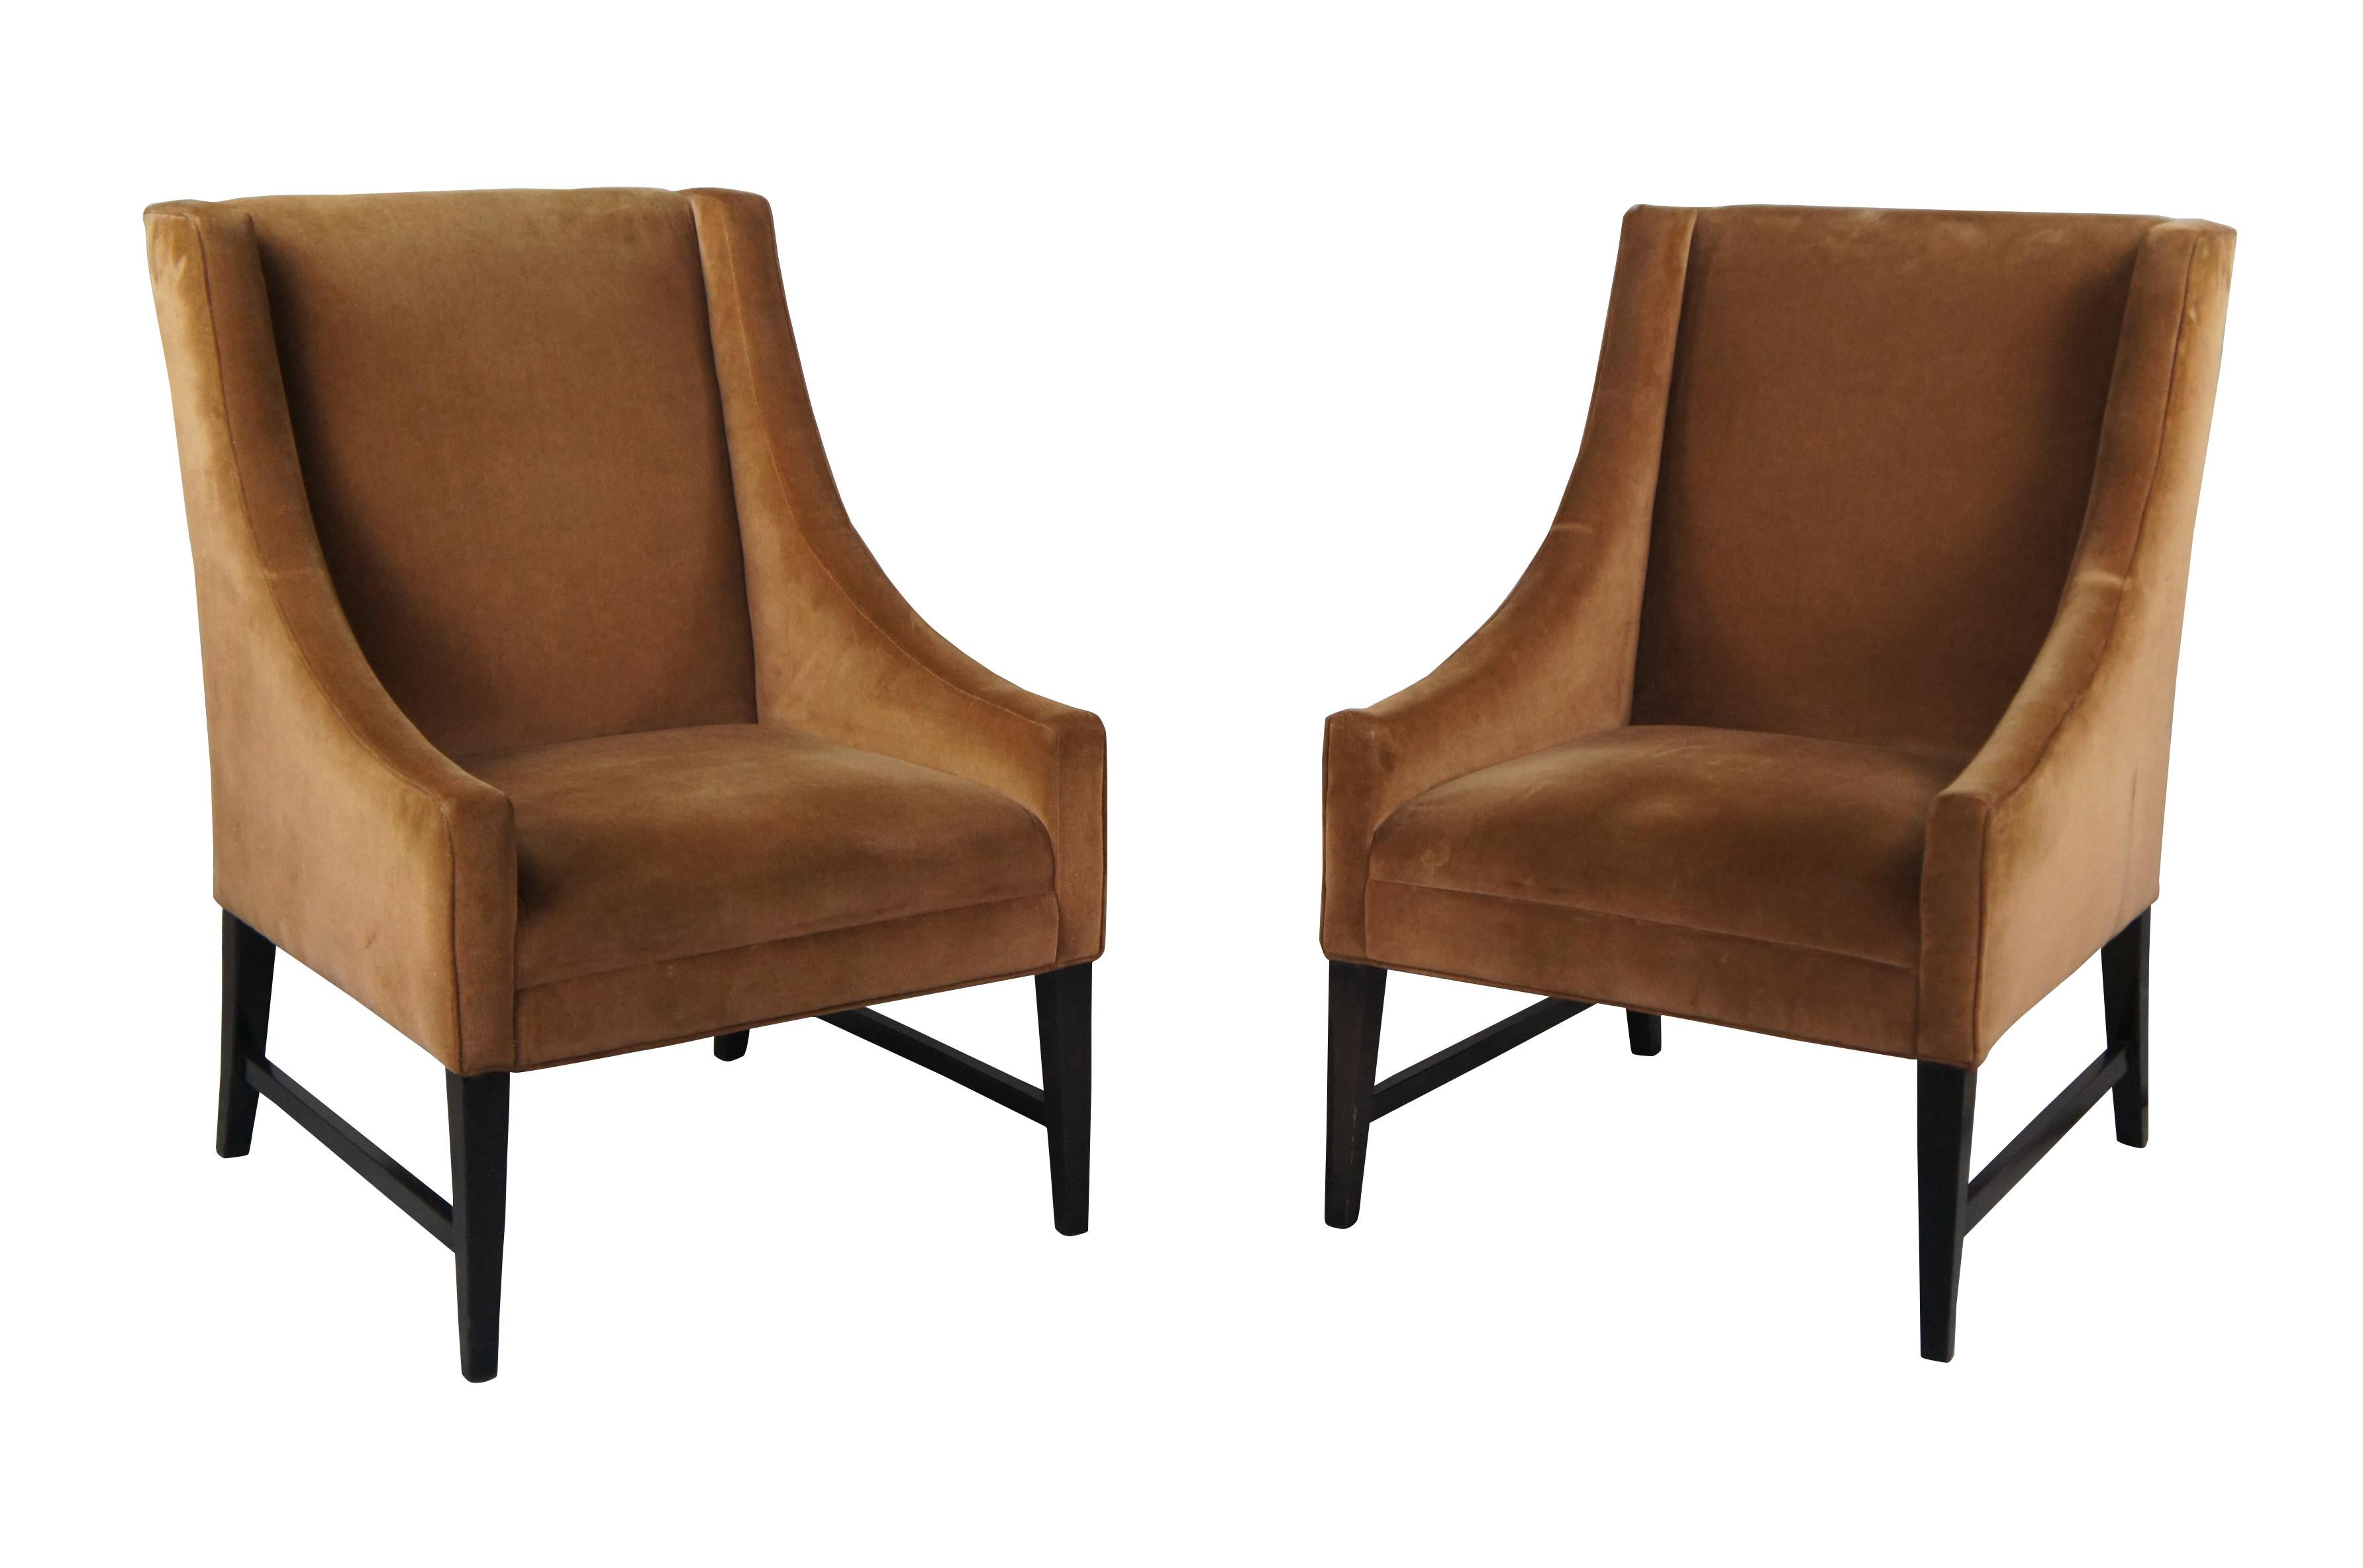 Pair of vintage brown velvet wingback style club chairs, featuring swooped arms over square tapered wooden legs.